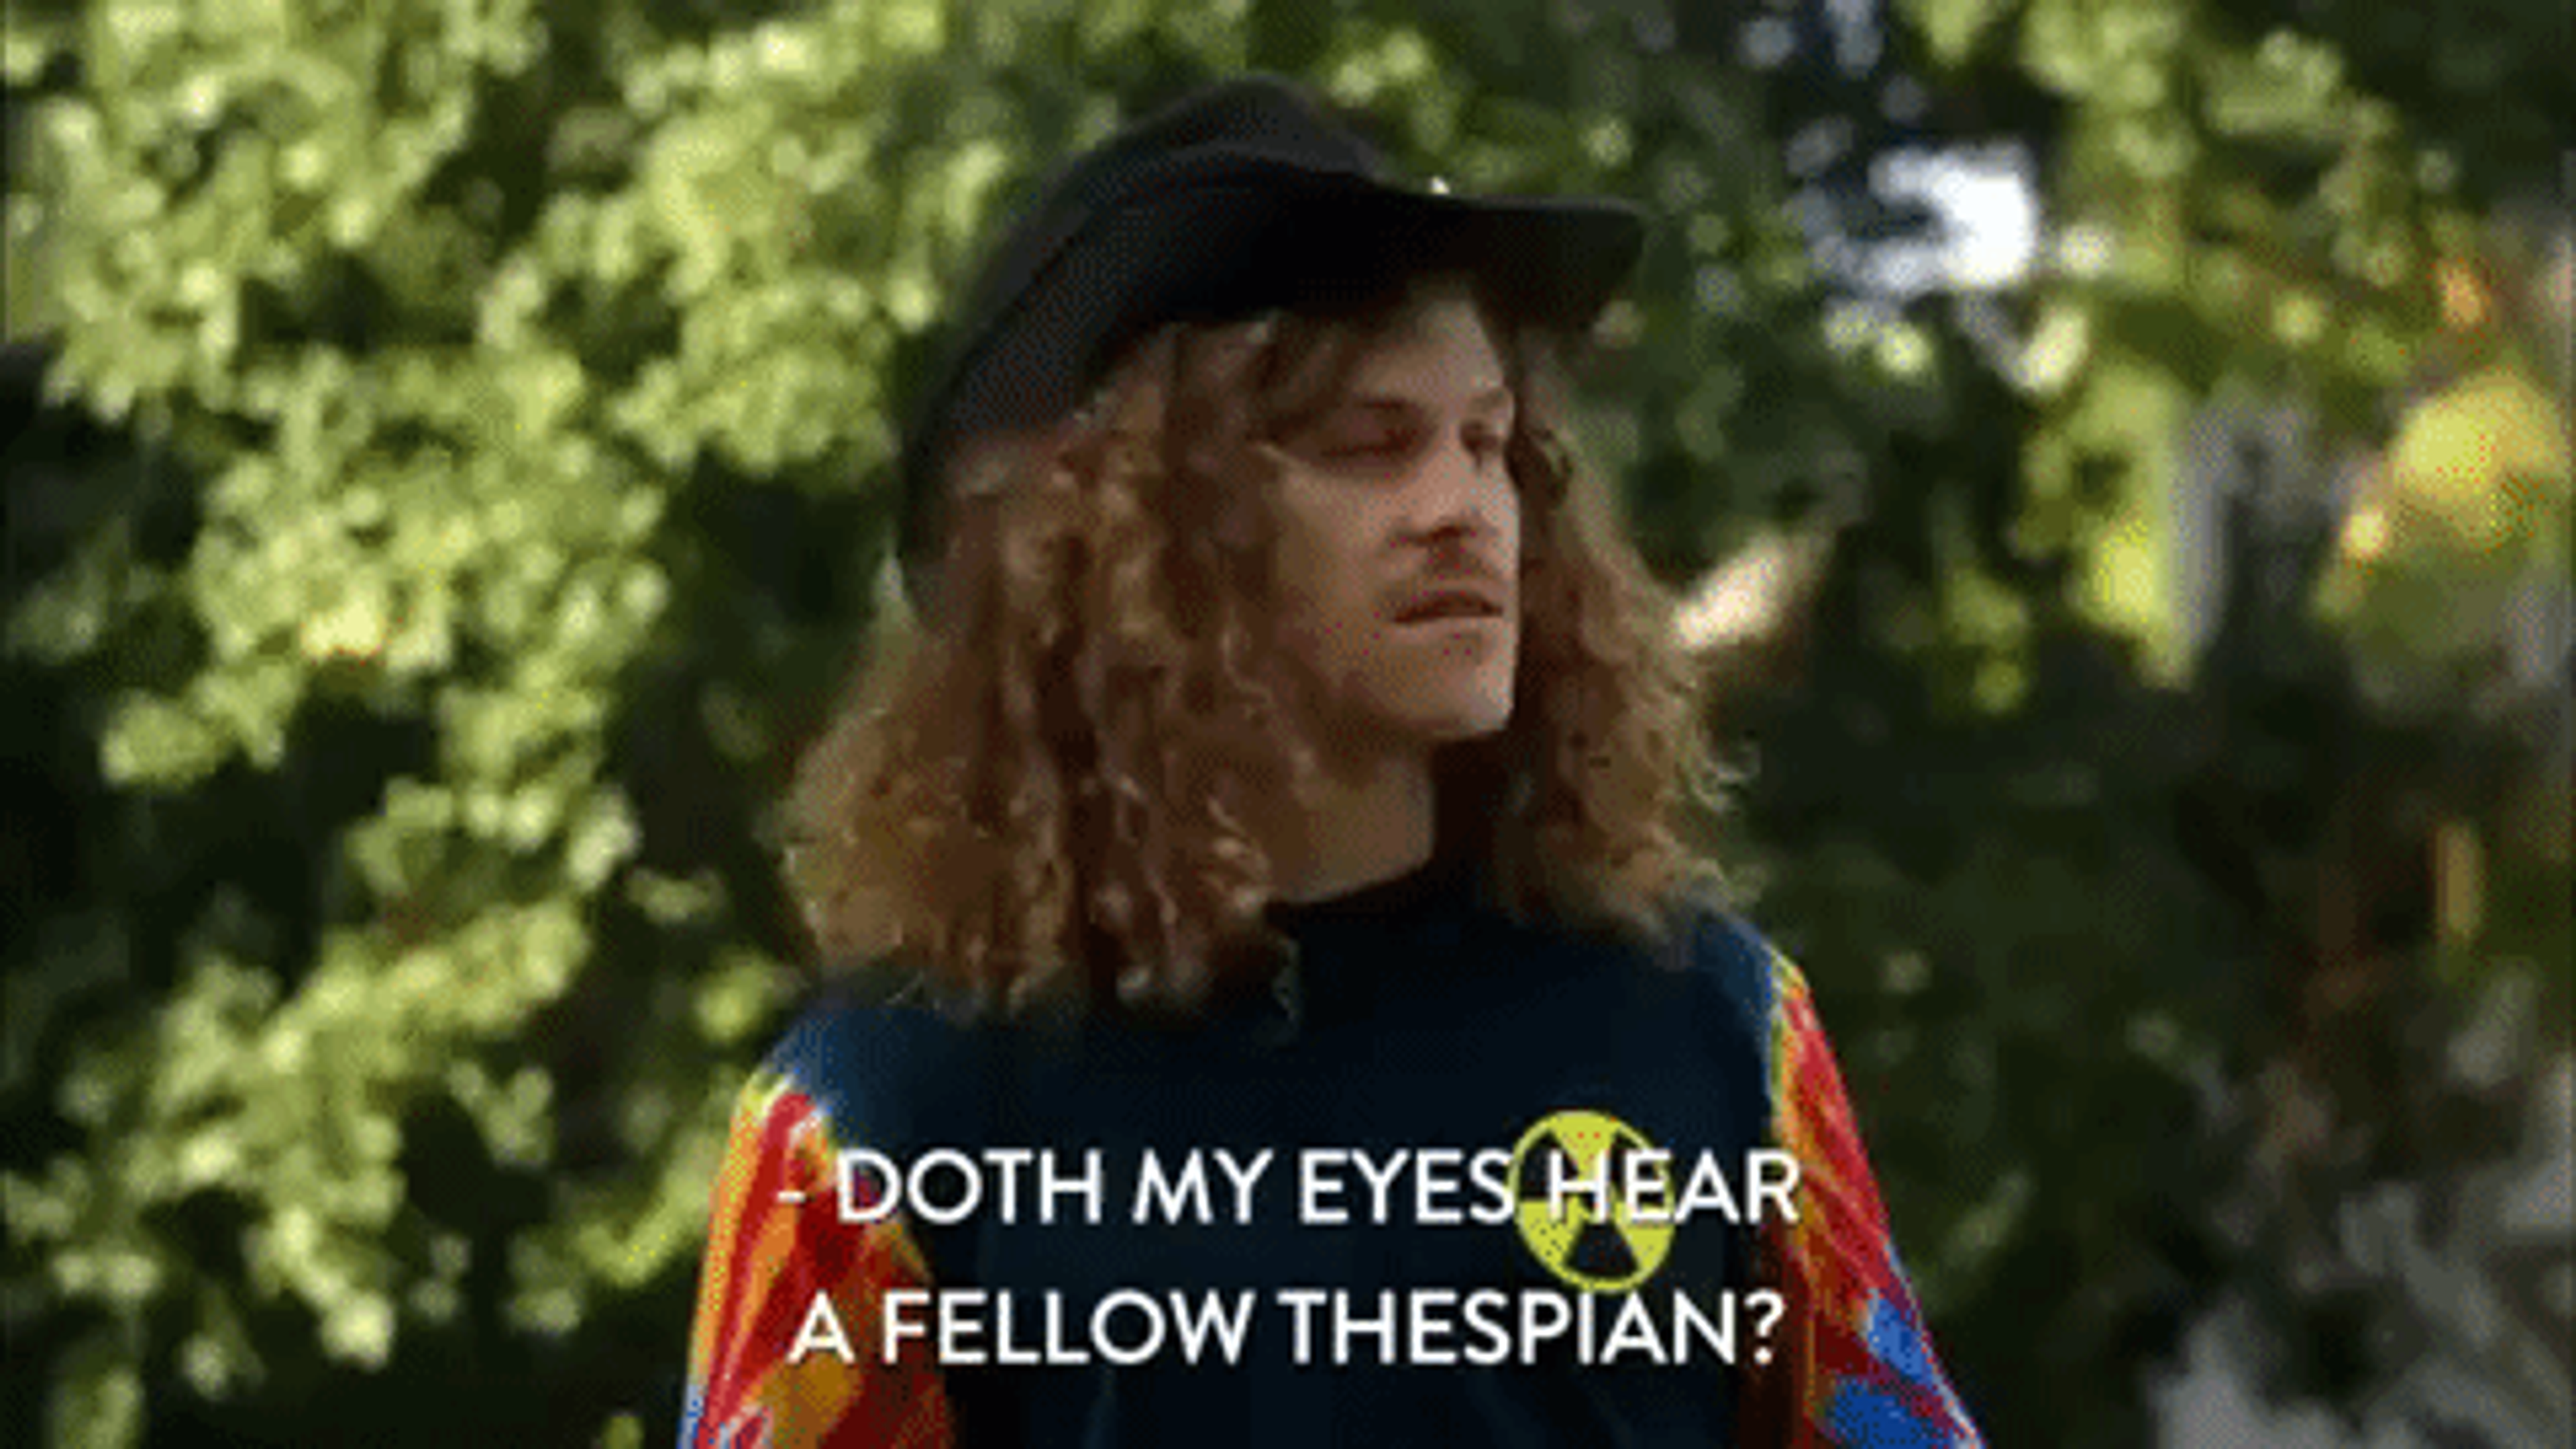 An image from a movie with a man in renaissance clothing. The text reads "Doth my eyes hear a fellow thespian?"